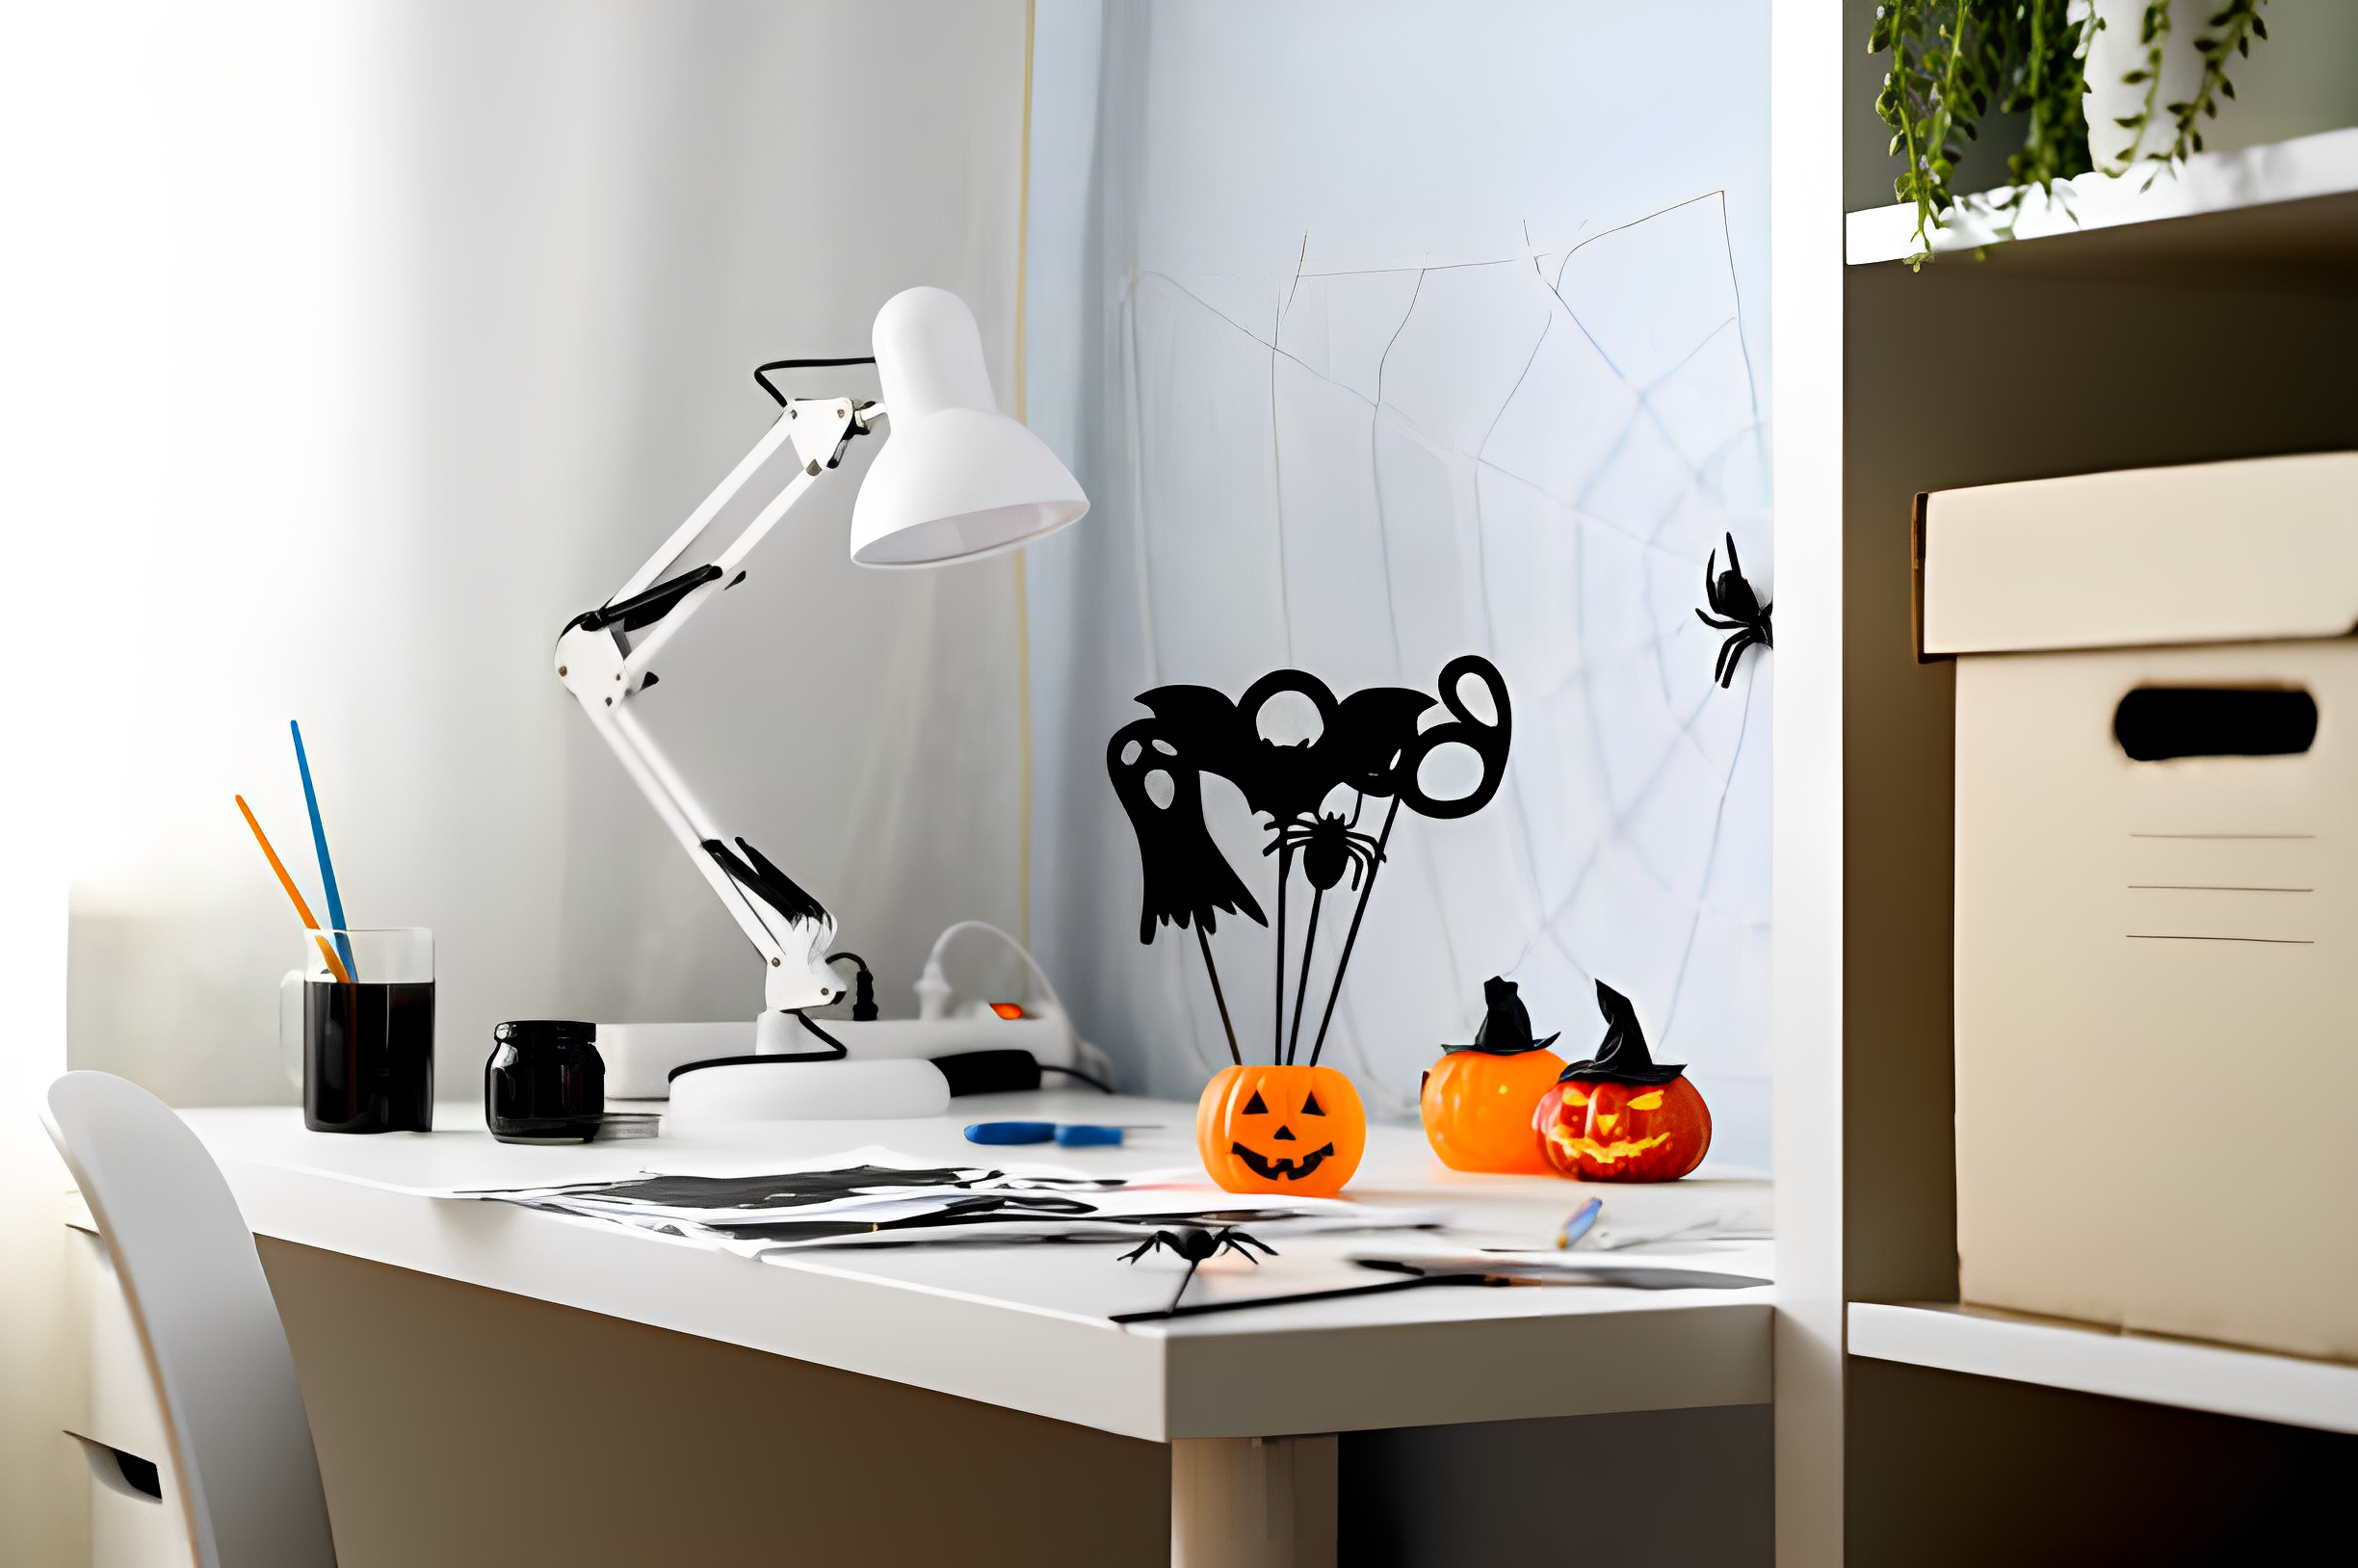 Halloween decorating ideas for the office